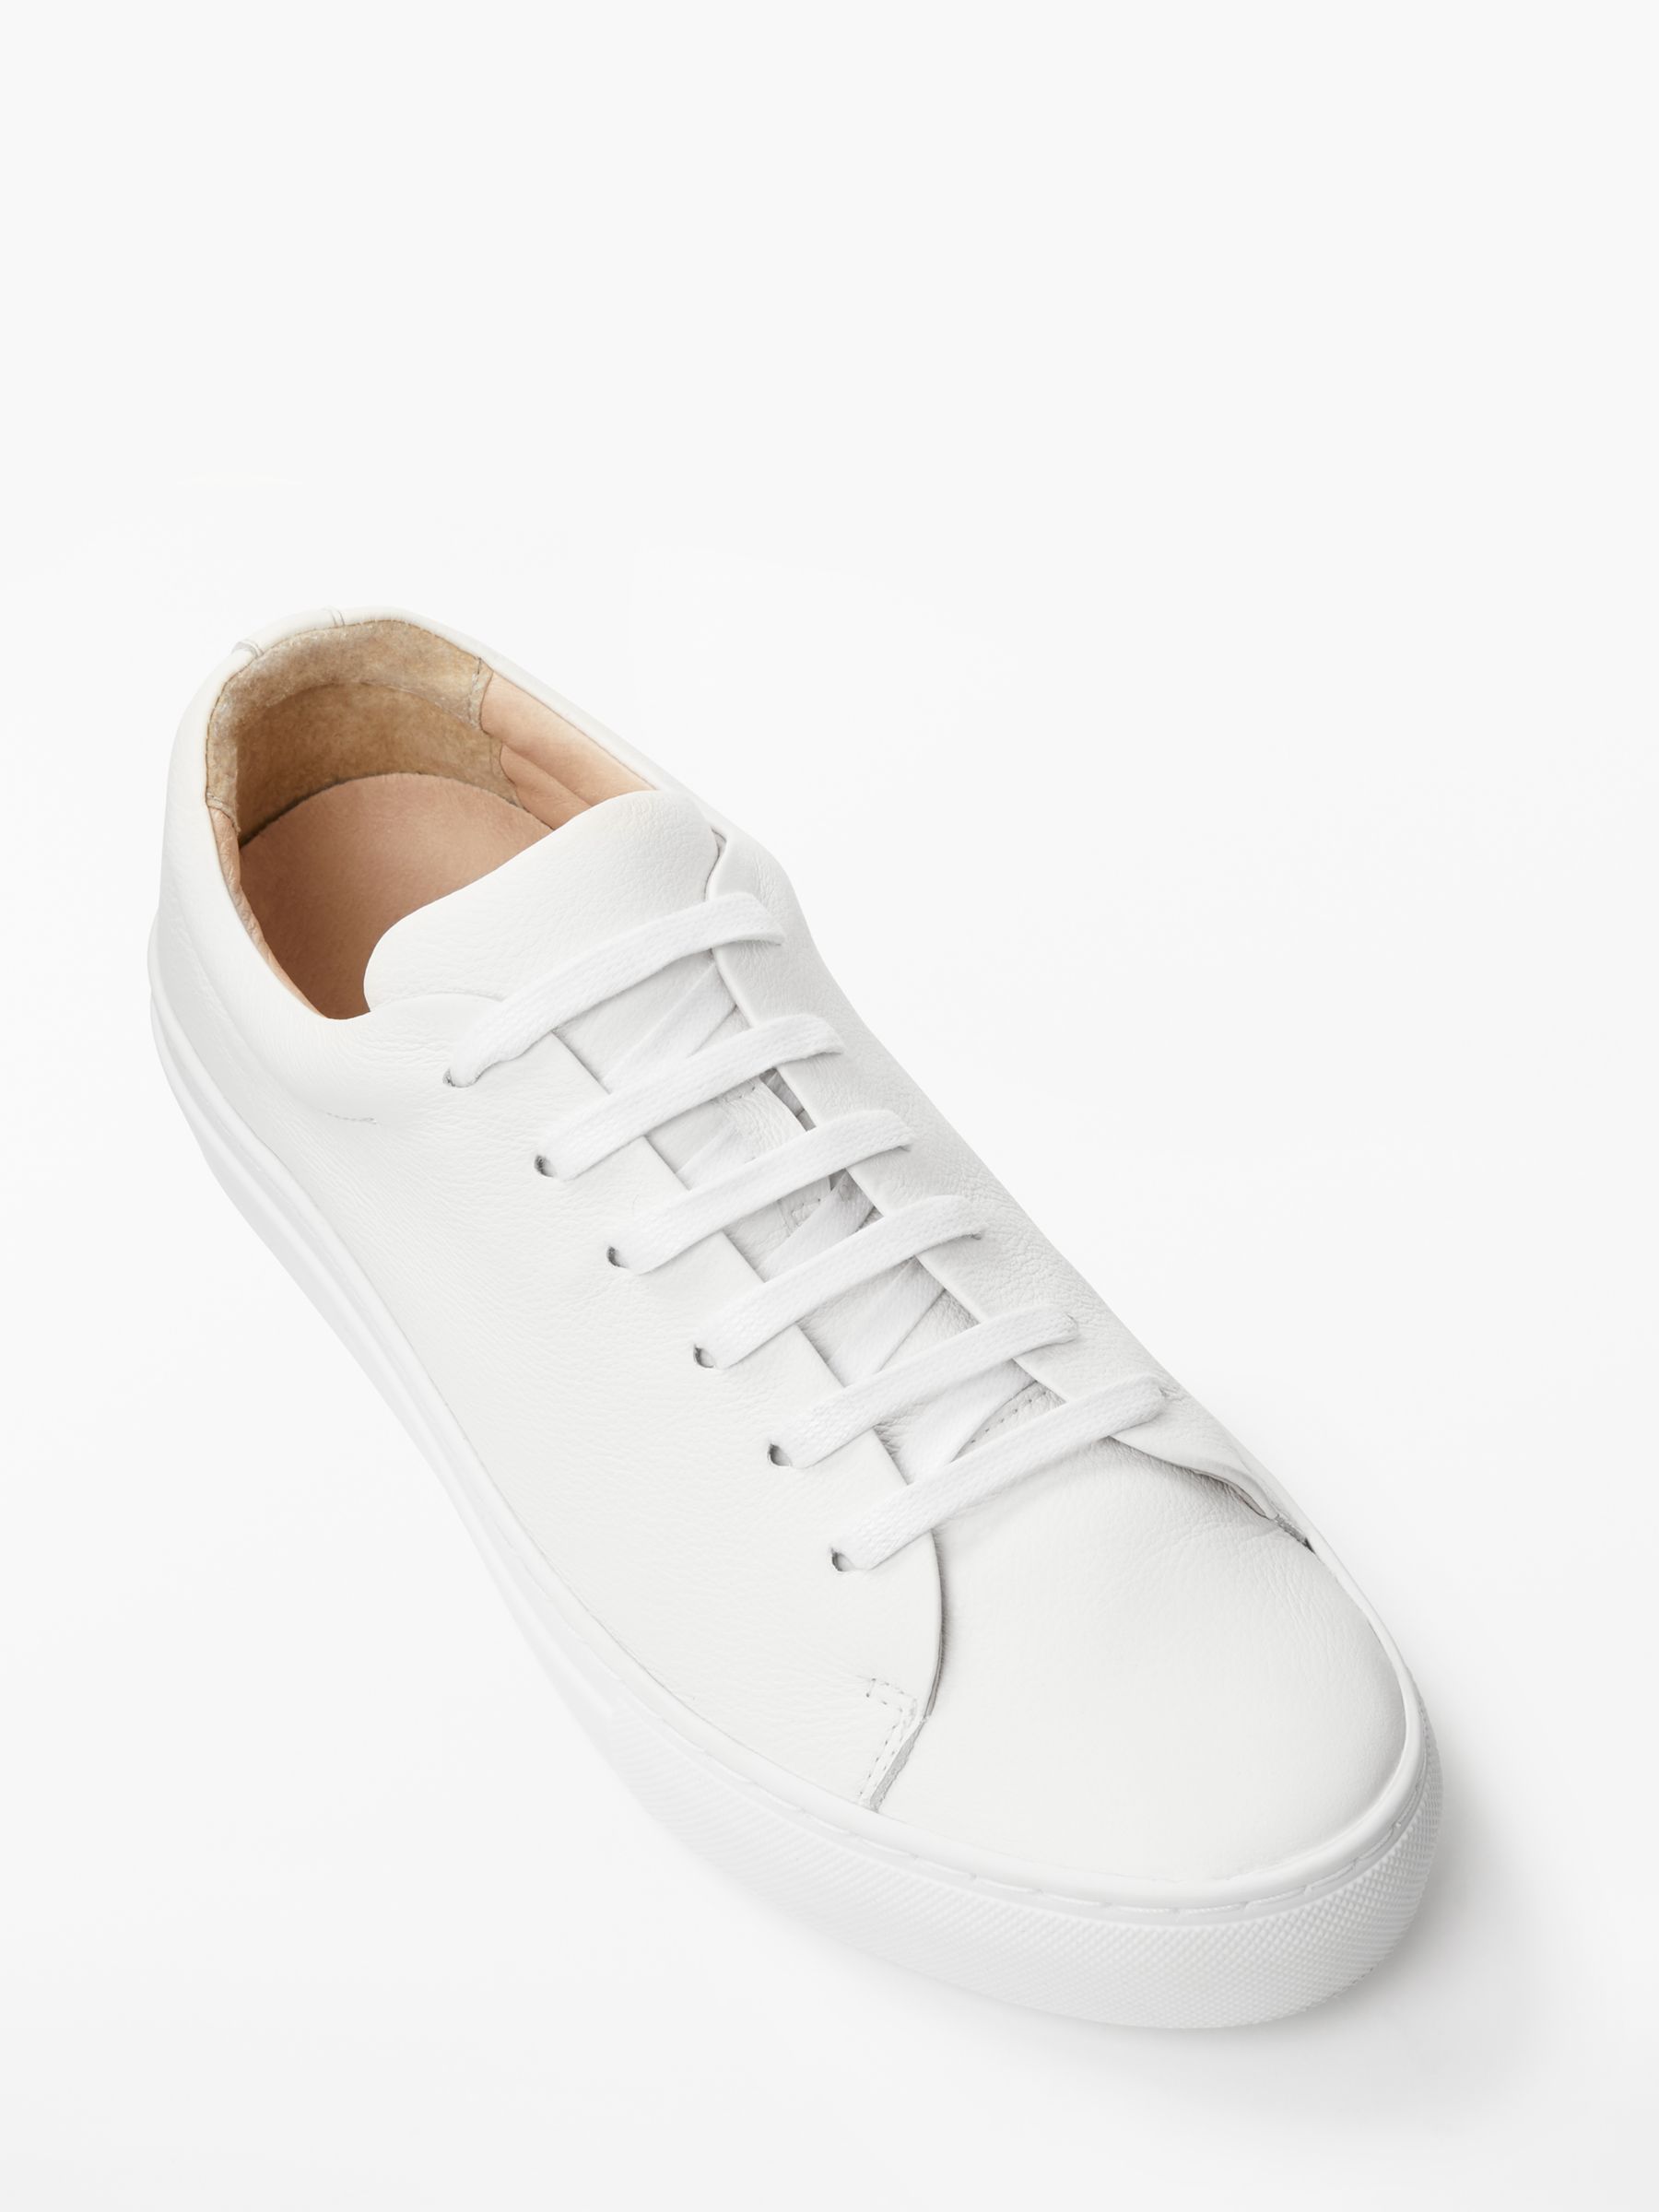 John Lewis Flora Lace Up Trainers, White Leather, 4